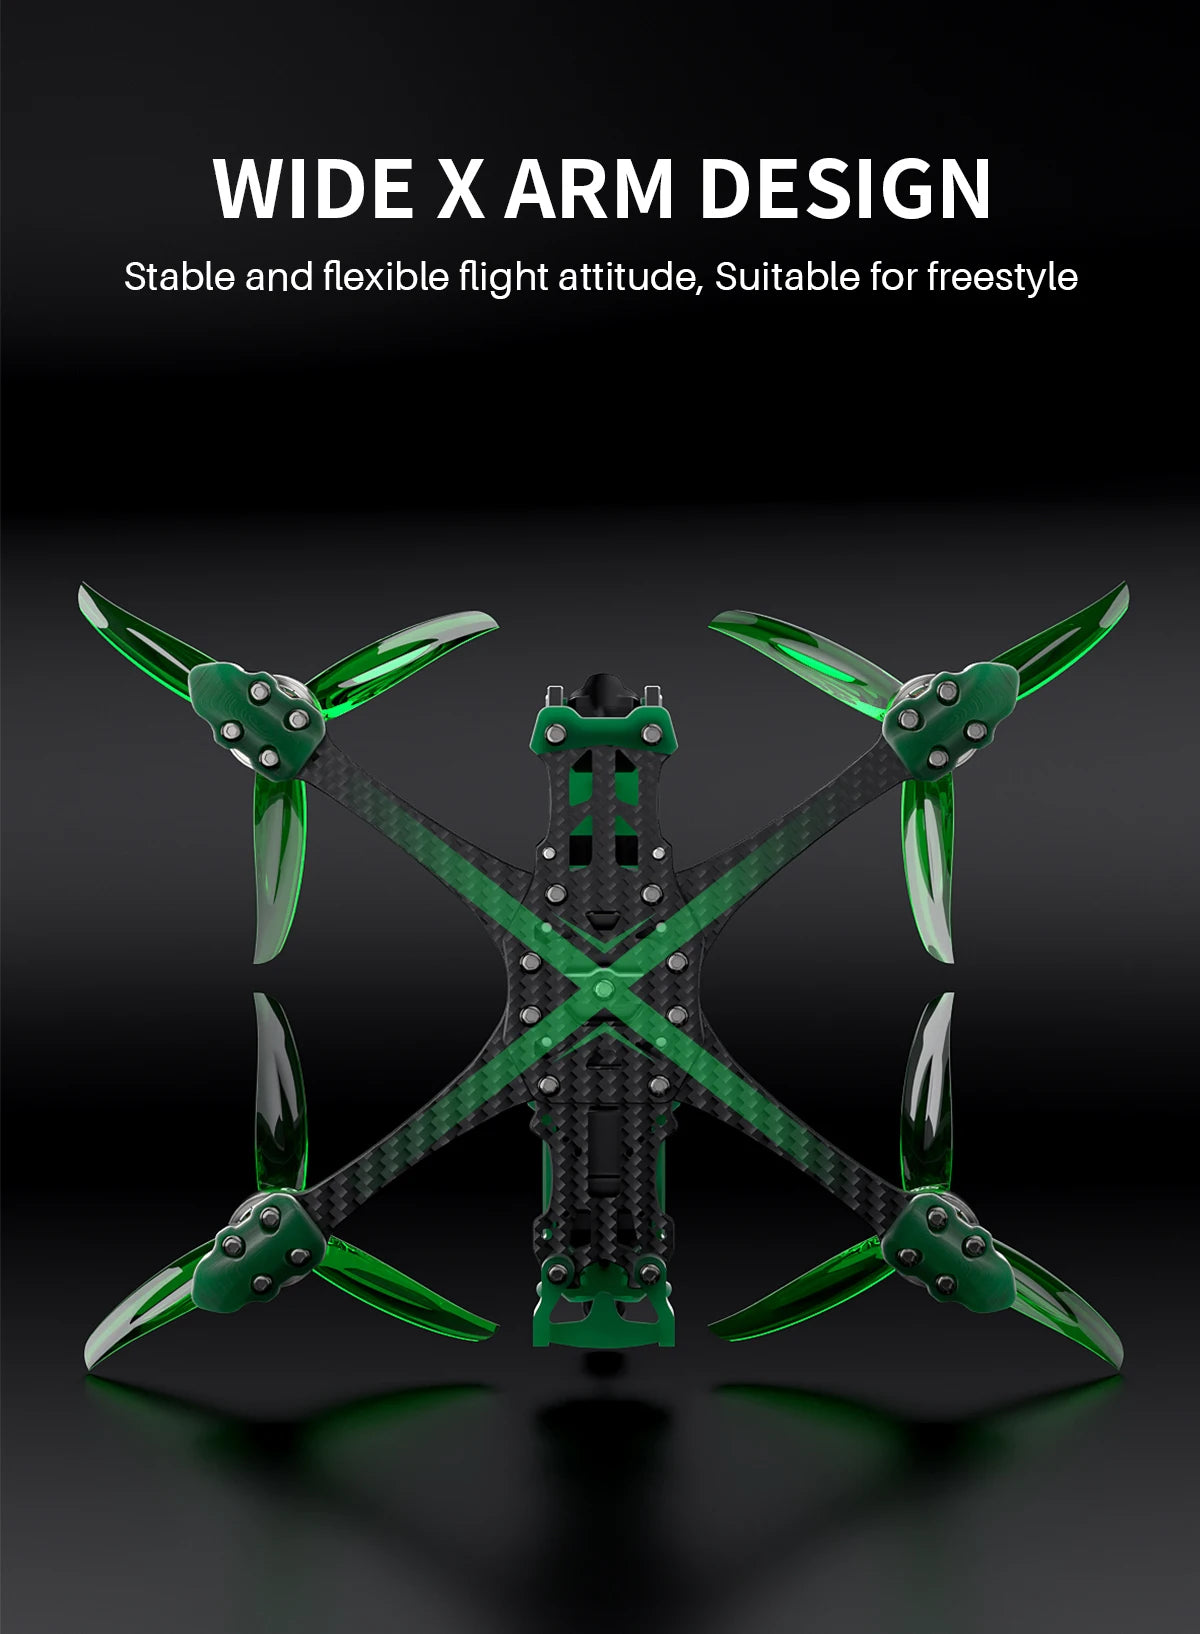 GEPRC MARK5 HD O3 Freestyle FPV Drone, WIDE XARM DESIGN Stable and flexible flight attitude, Suitable for freestyle